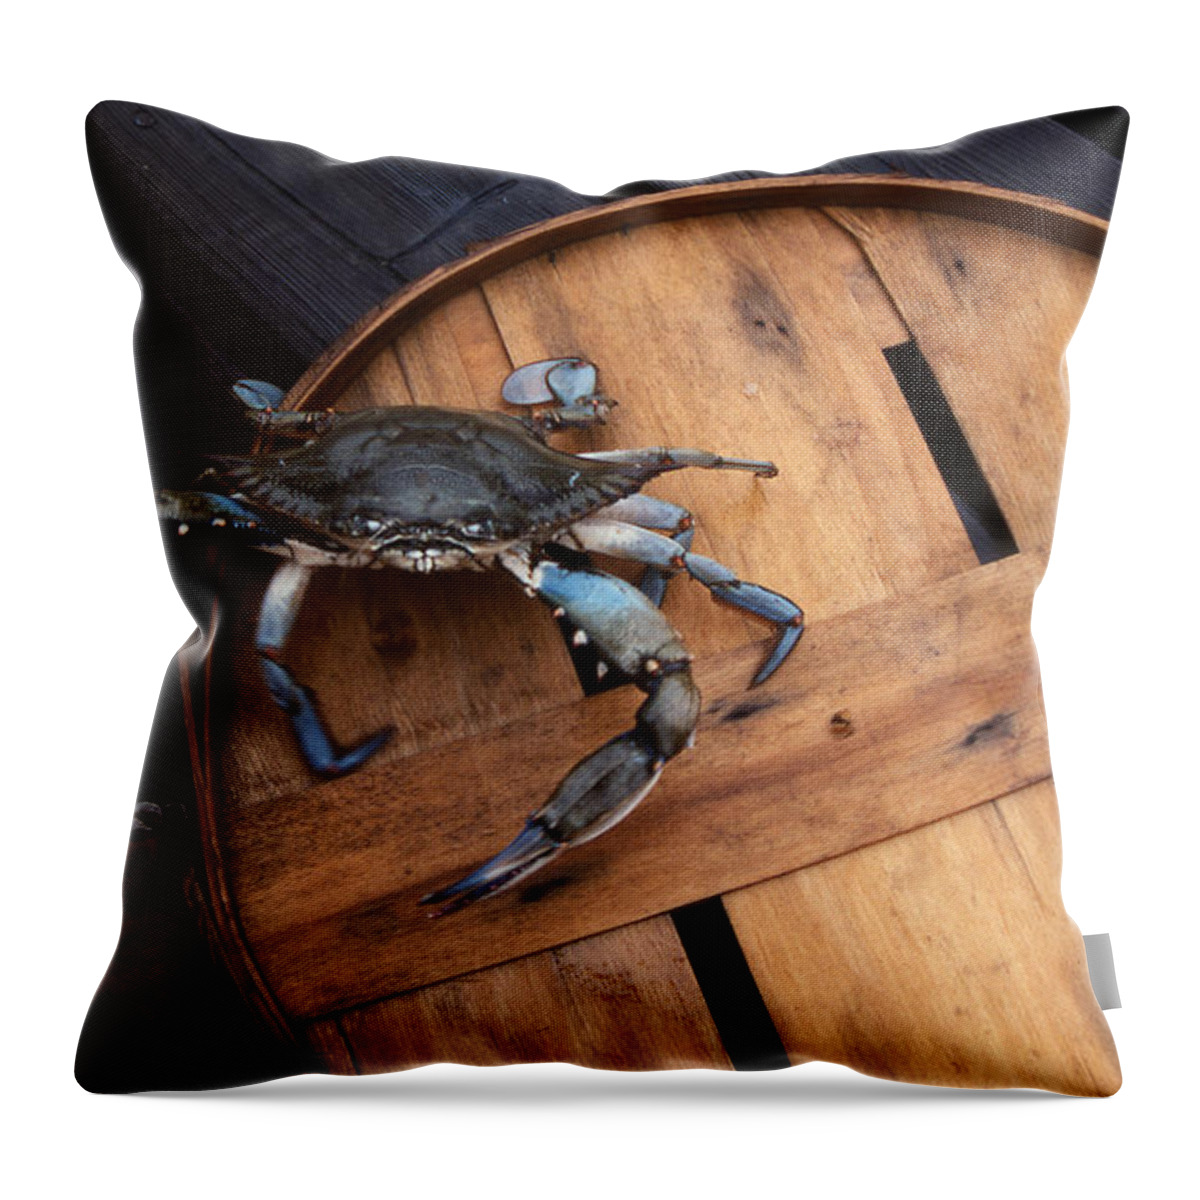 Crab Throw Pillow featuring the photograph One Angry Crab by Skip Willits